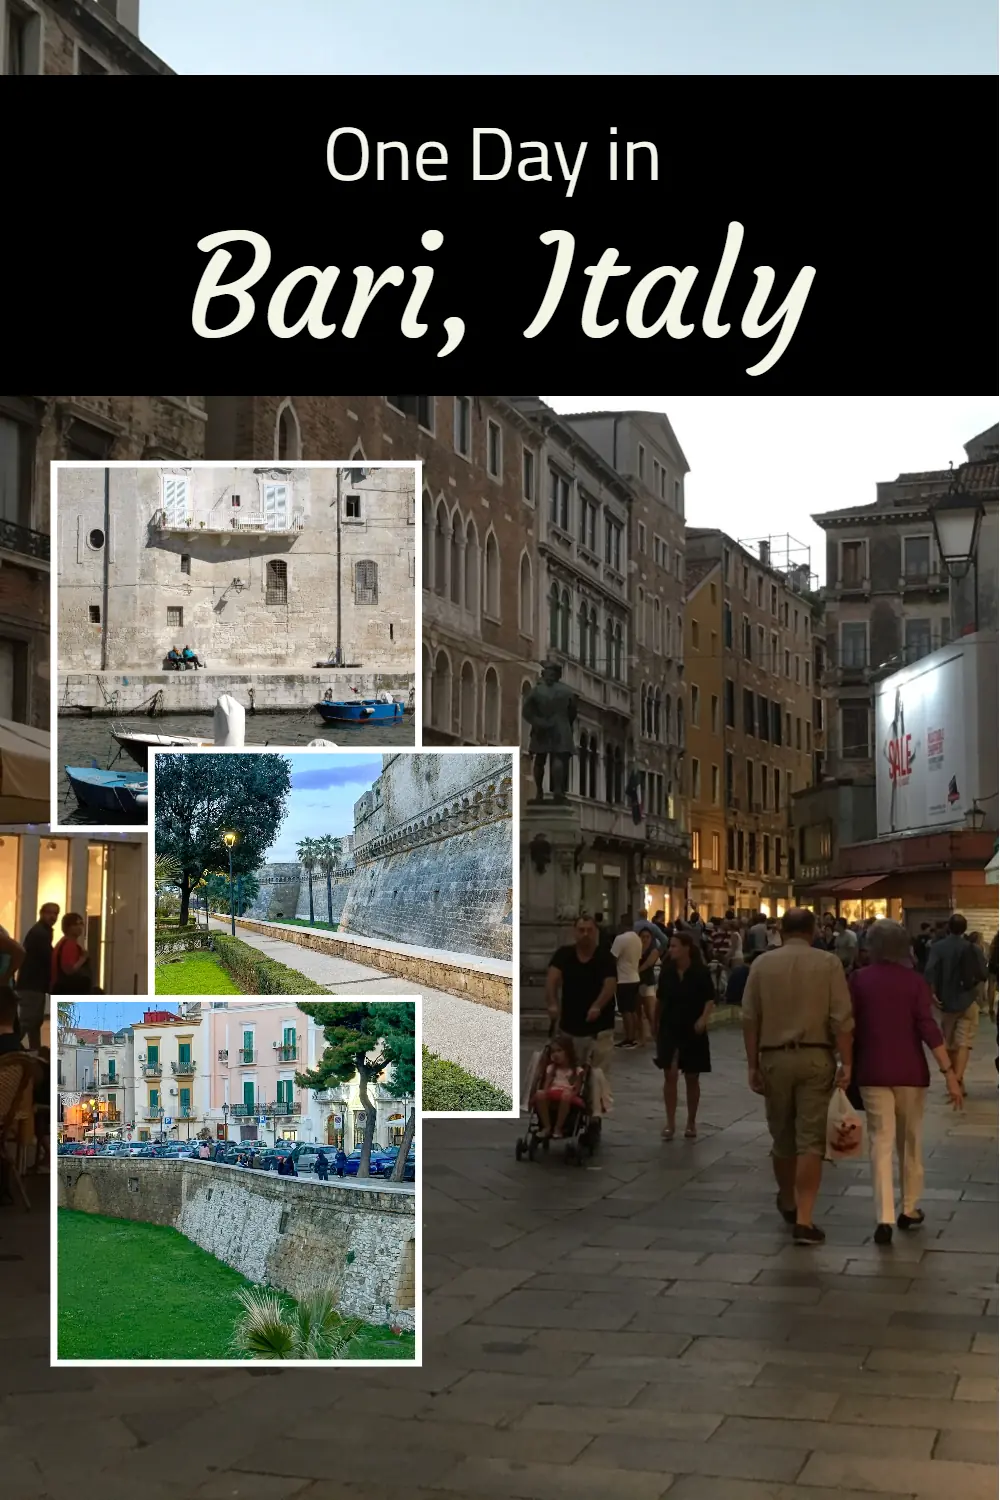 Unveil the surprising link between Bari and Santa Claus. Bari isn't just a city with a rich past , but it's also home to St. Nicholas, a kind saint and the original Santa Claus. Dive into this fascinating connection.